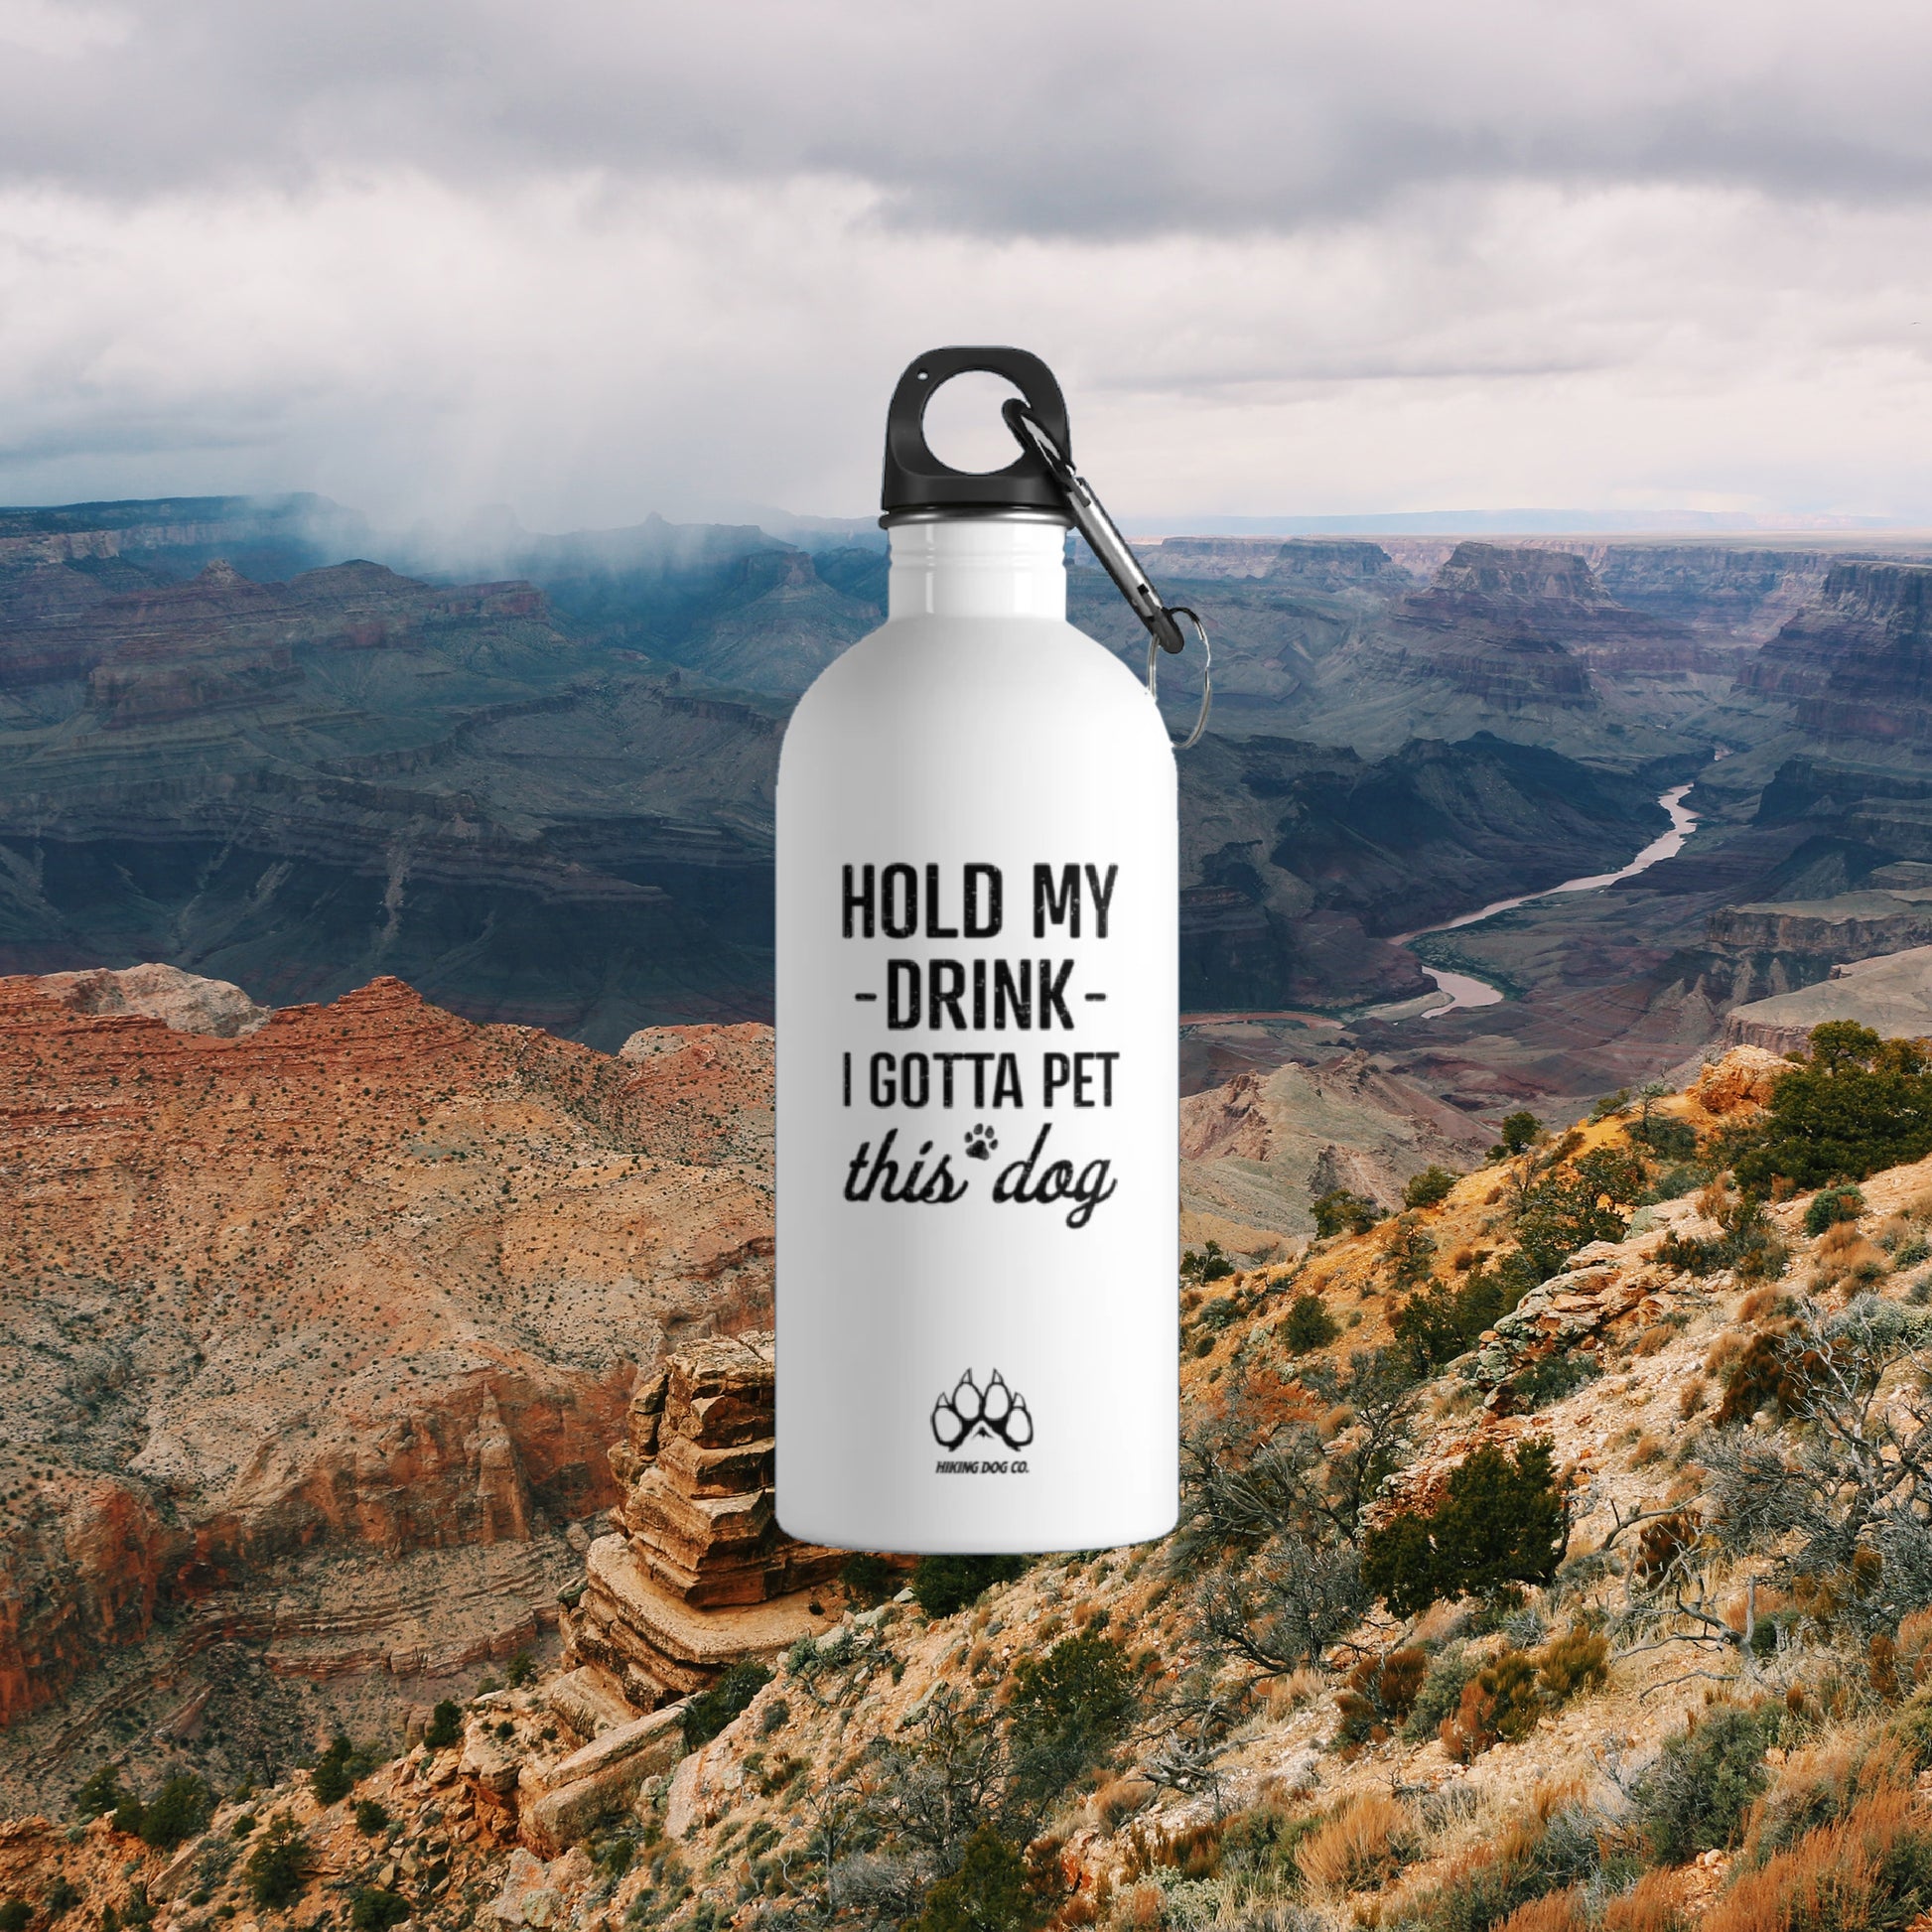 Keep Calm & Hug the Dog Water Bottle with Lid